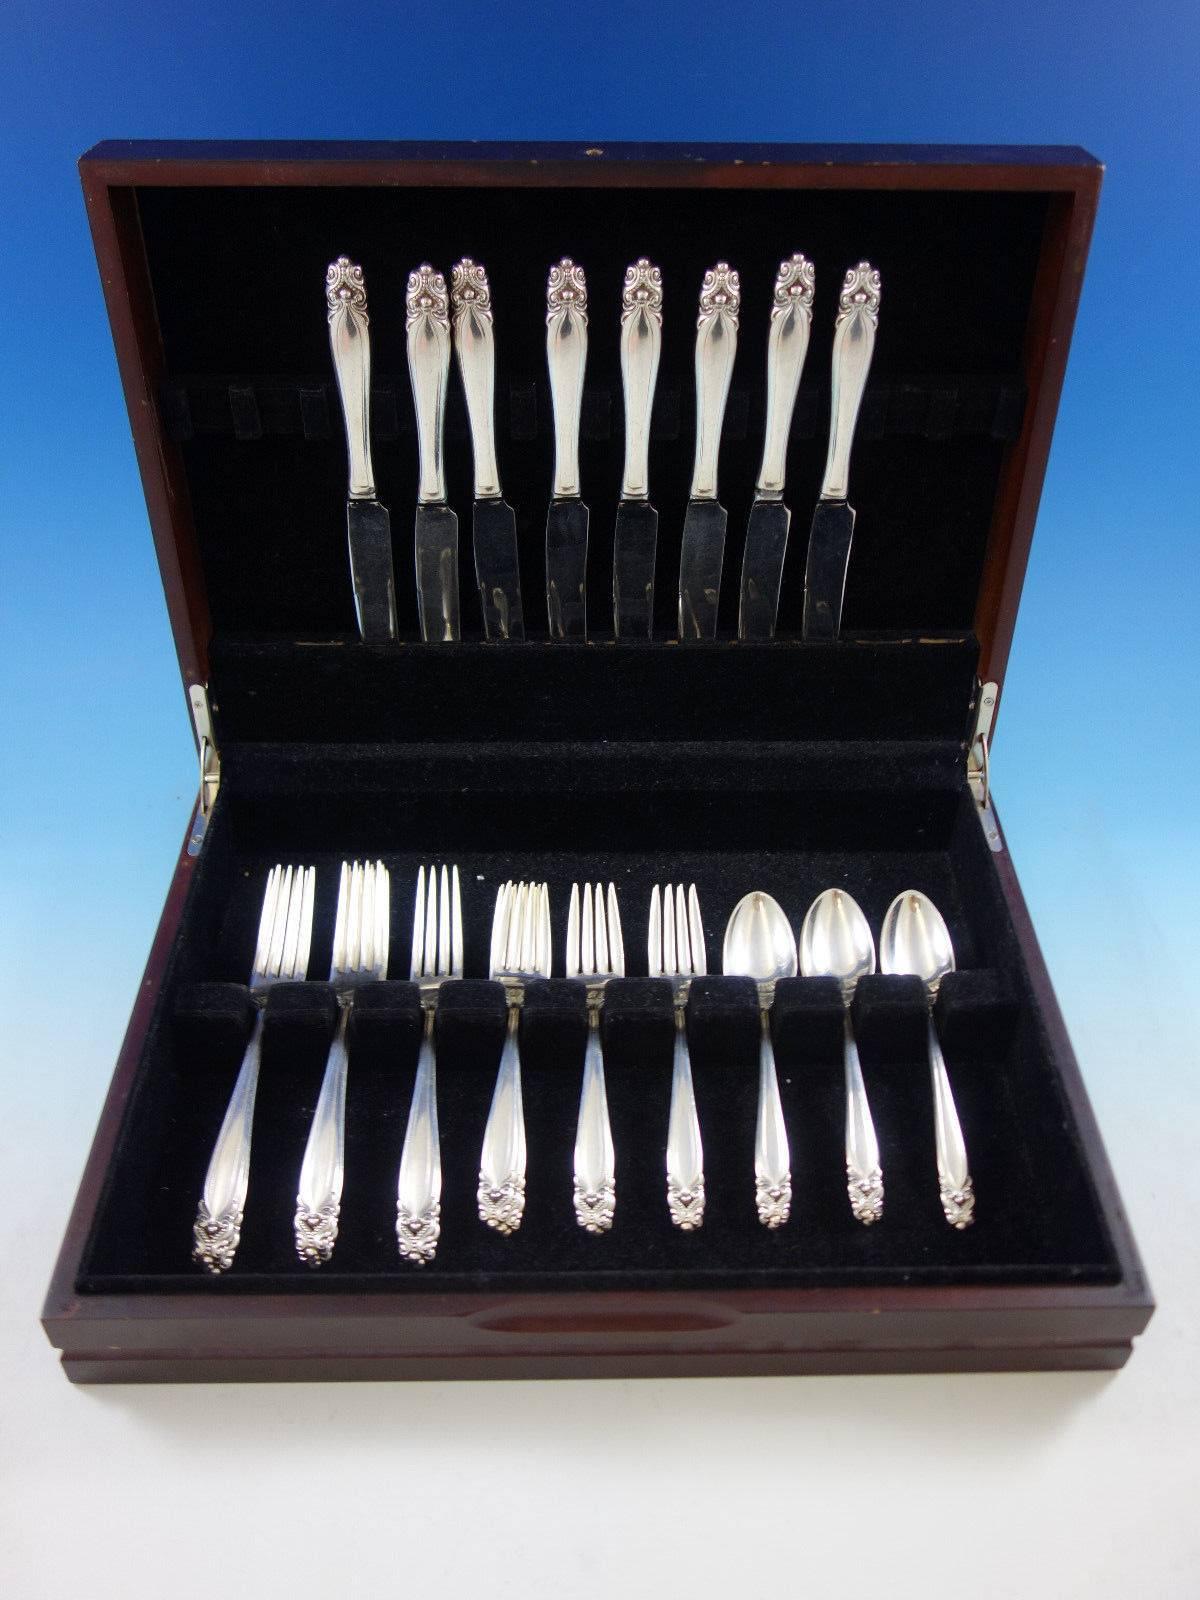 King Christian by Wallace sterling silver flatware set of 32 pieces. This set includes: 

Eight knives, 9